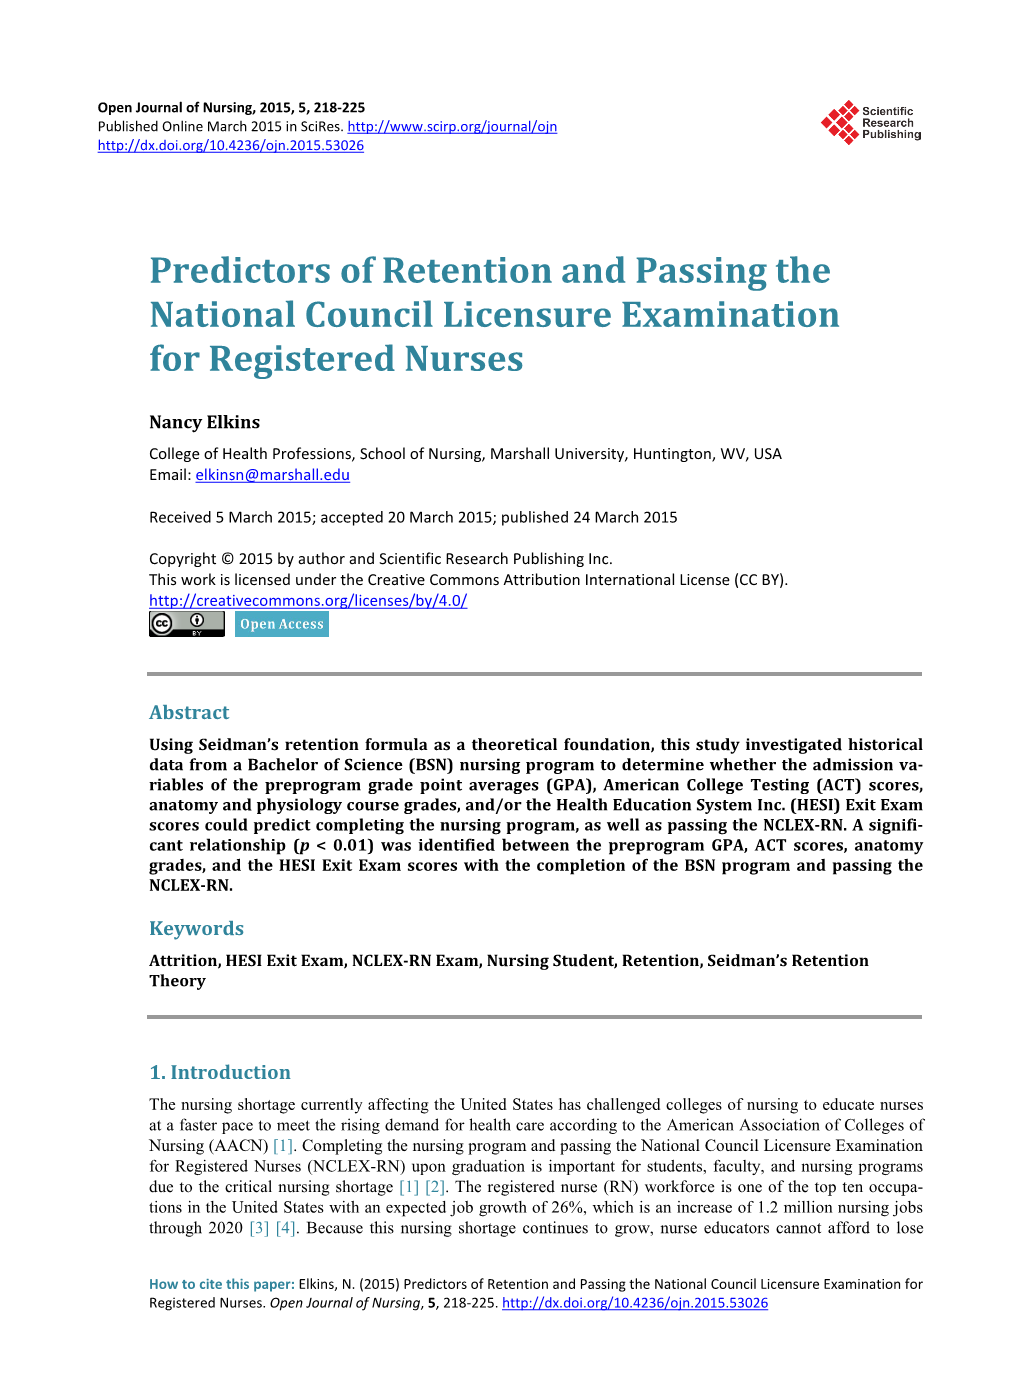 Predictors of Retention and Passing the National Council Licensure Examination for Registered Nurses